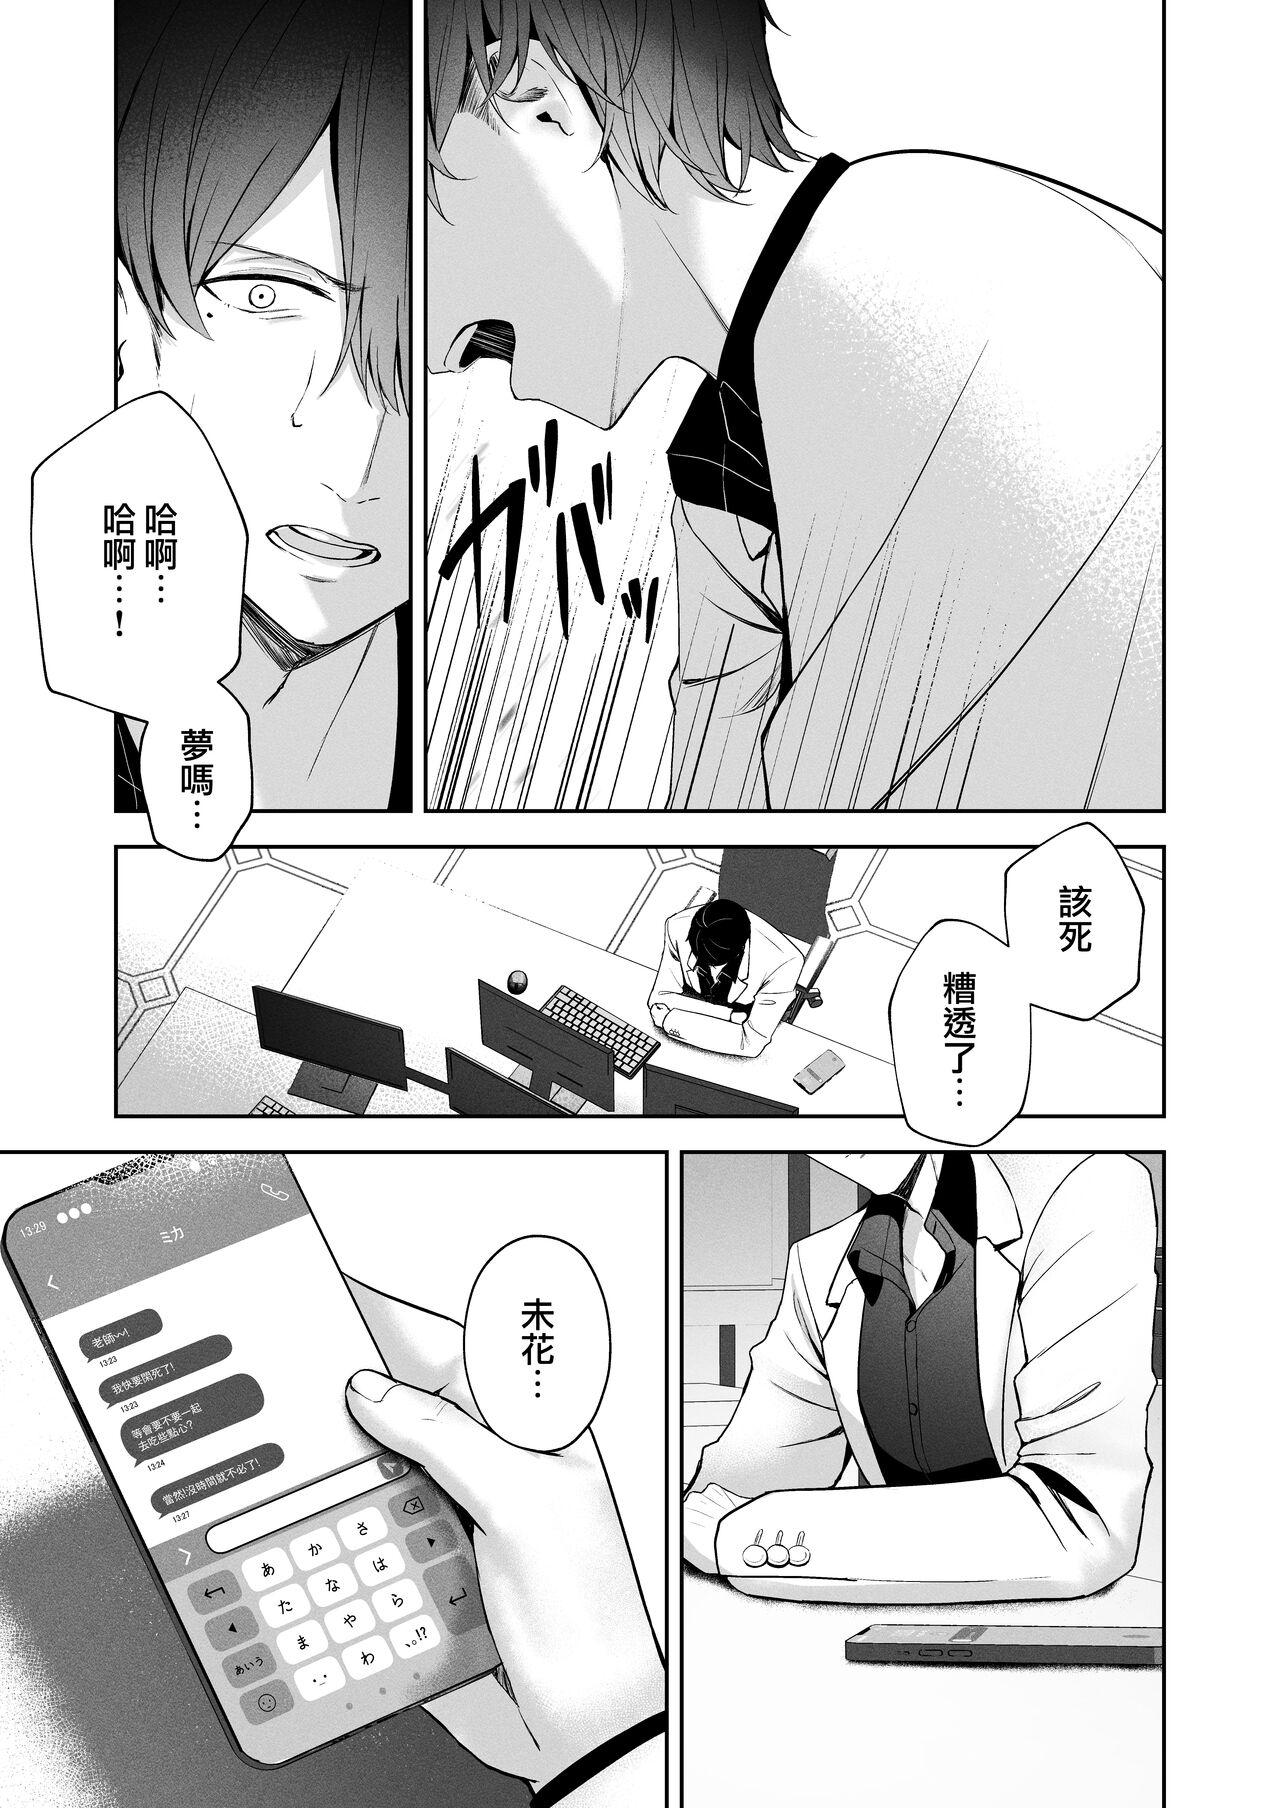 Glasses Mikazuki no Pierce Hole - Pierce Hole of The Cresent Moon - Blue archive Stroking - Page 5